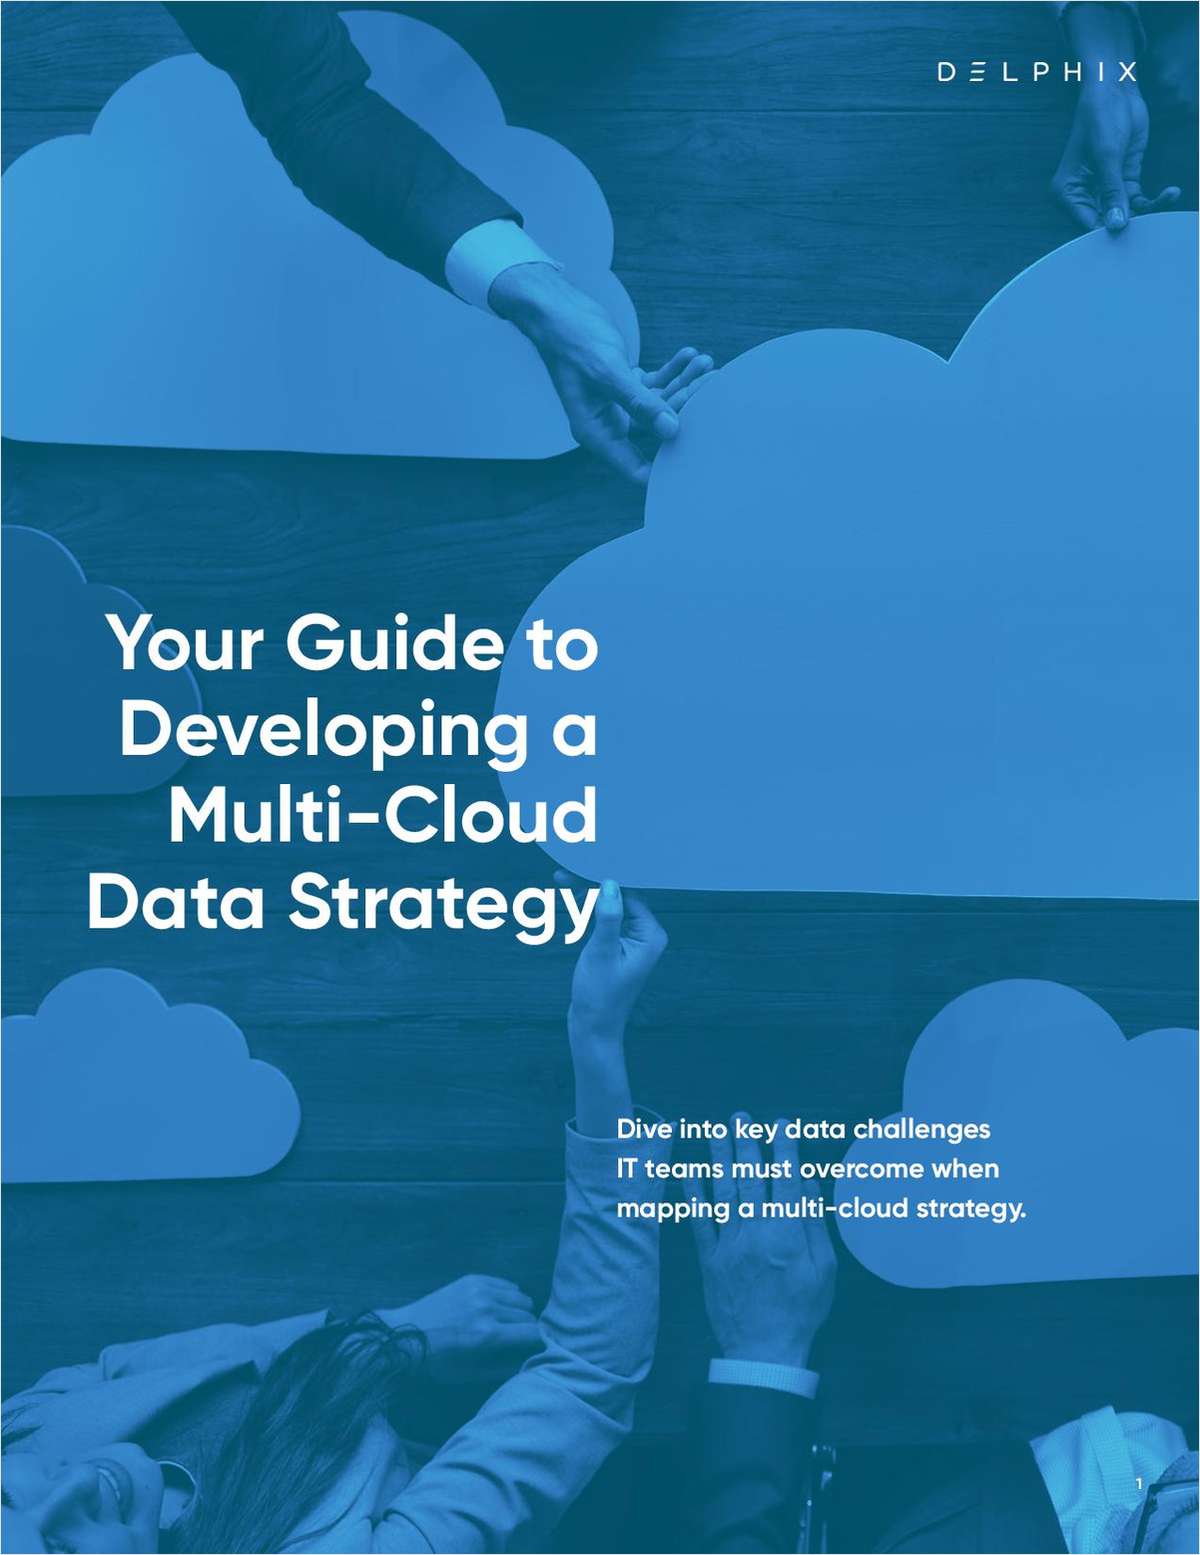 Your Guide to Developing a Multi-Cloud Data Strategy